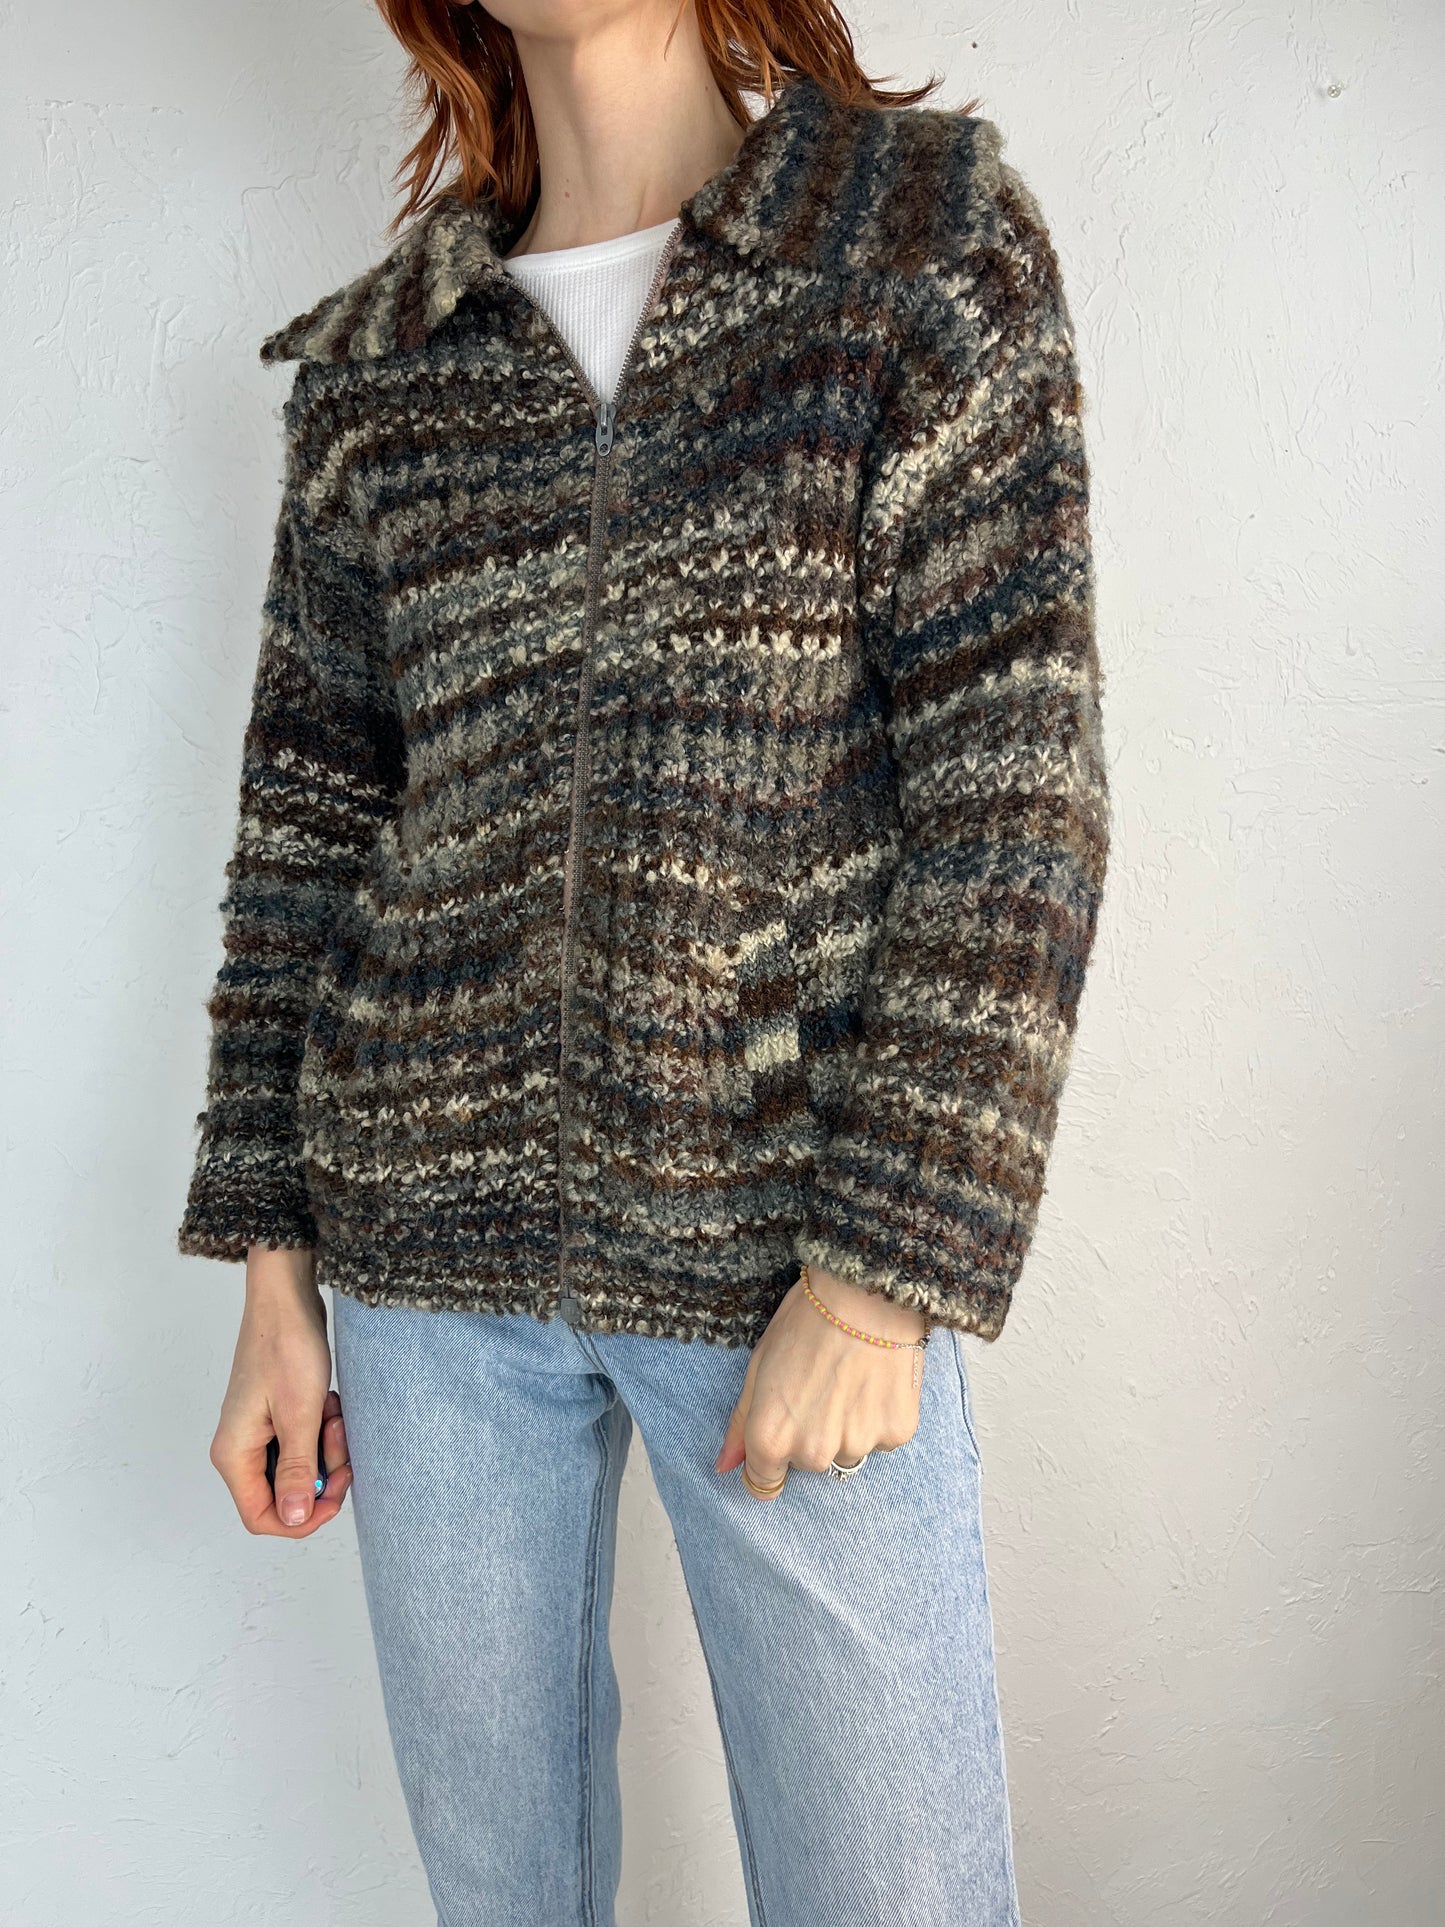 70s 80s 'Mr Poodle' Zip Up Wool Cardigan Sweater / Small